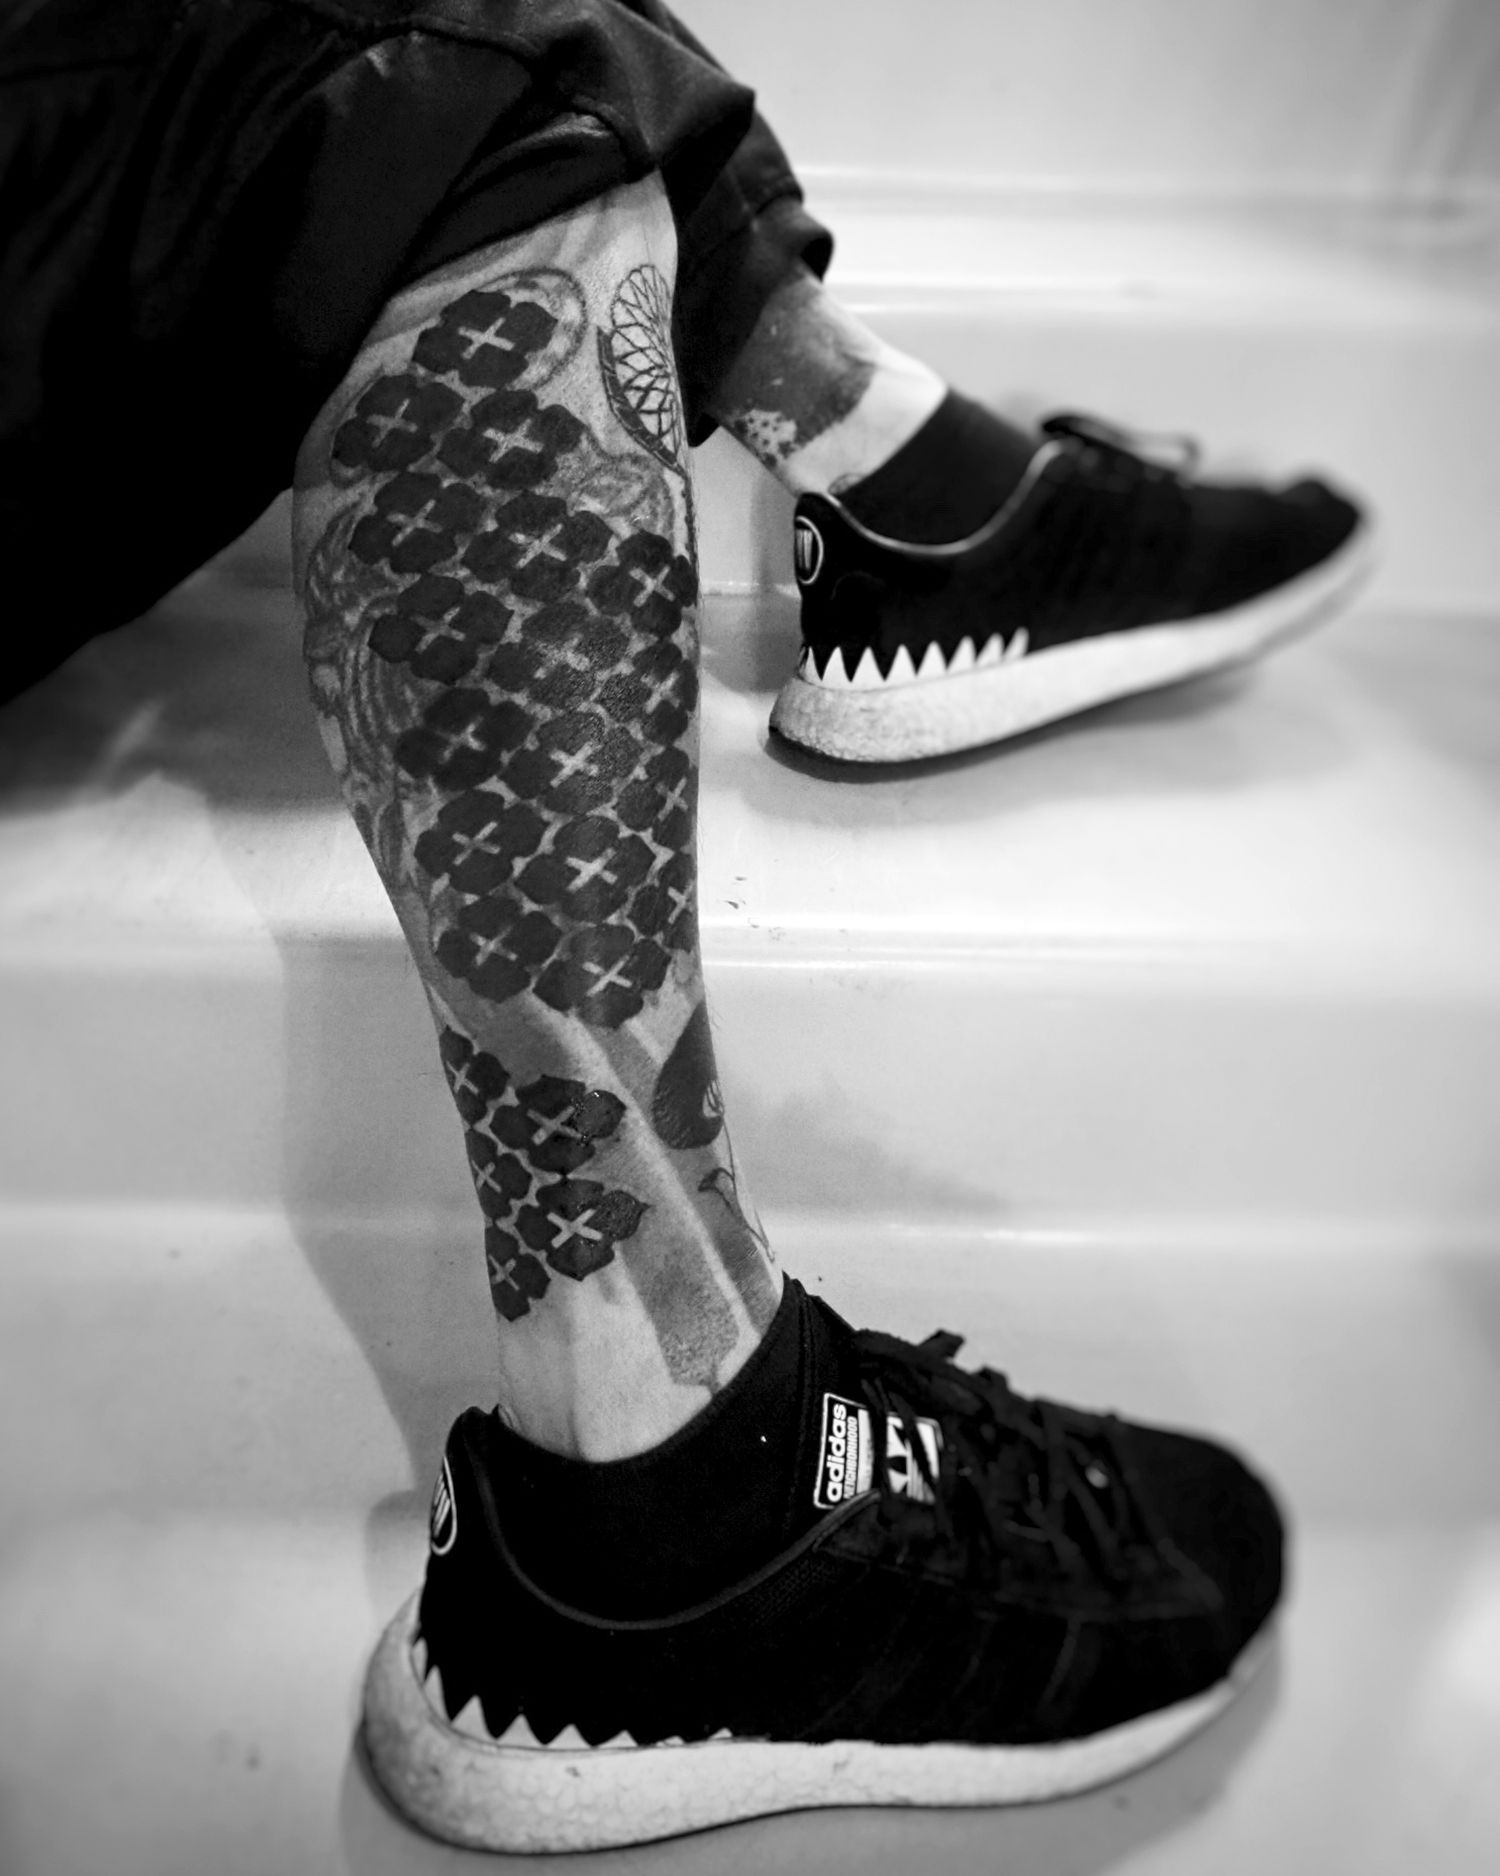 Blastover tattoo (black ink) on Gakkin's leg, by his daughter